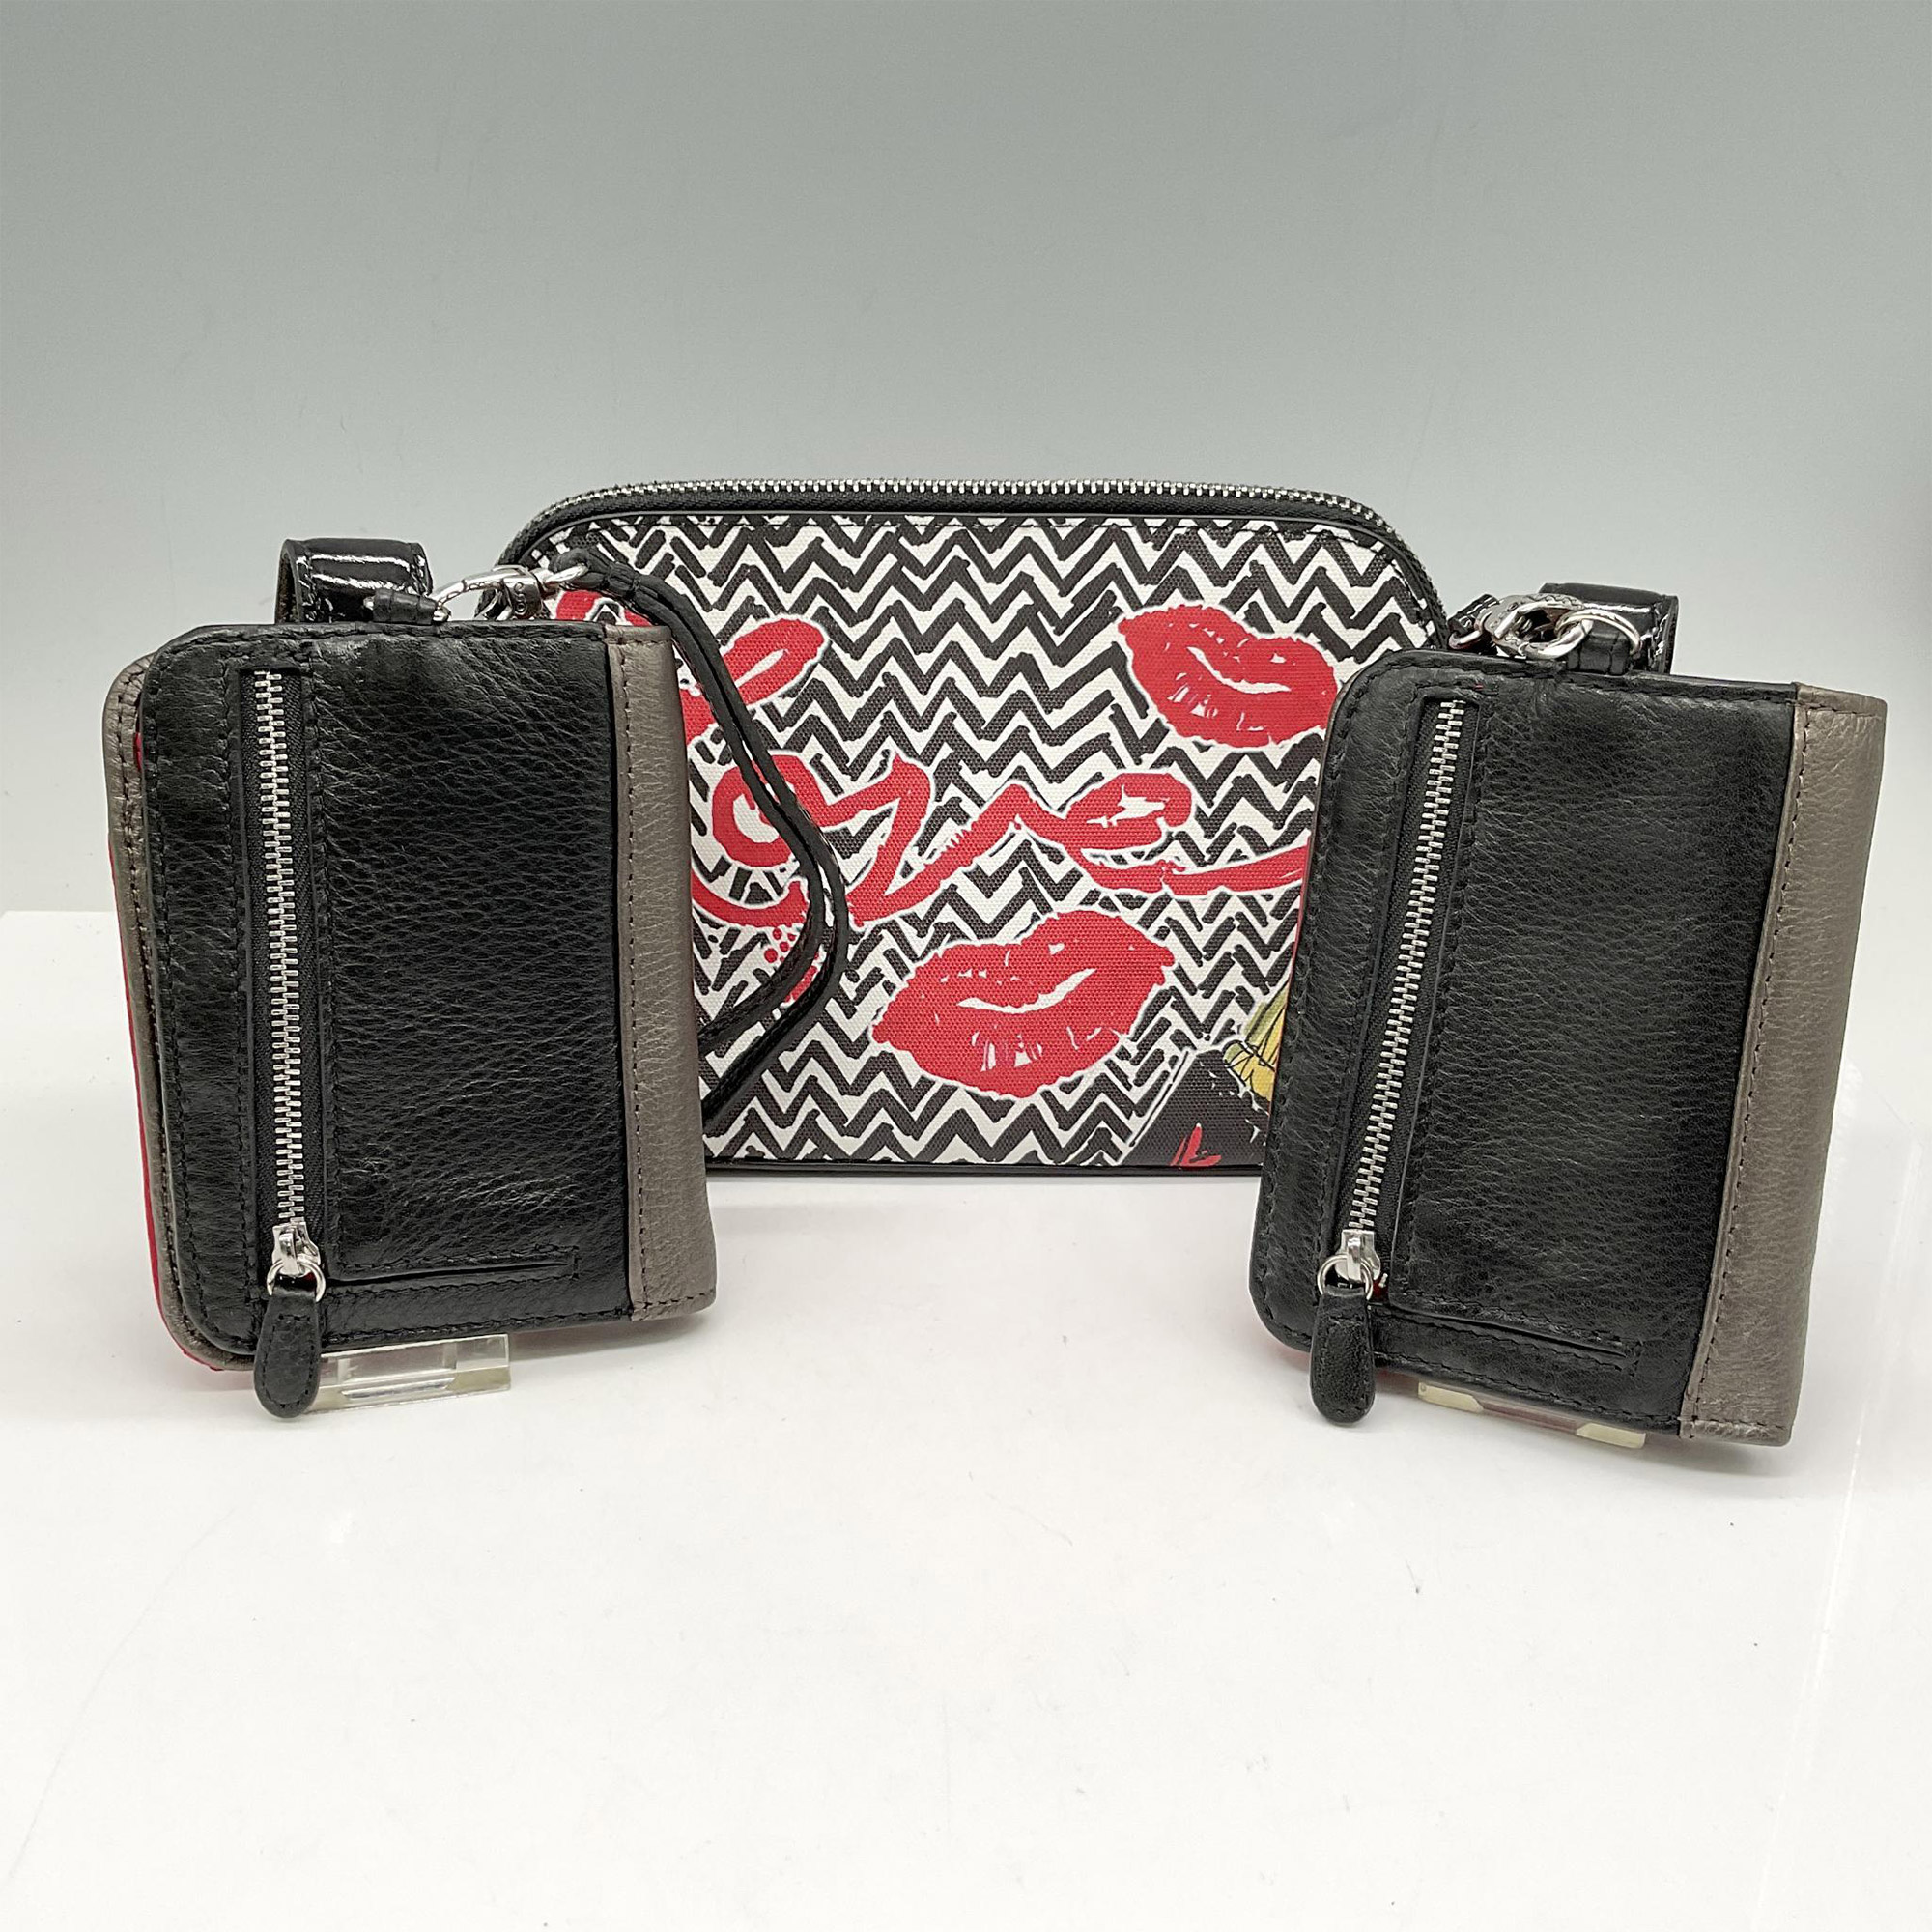 3pc Brighton Red and Black Accessories - Image 2 of 2